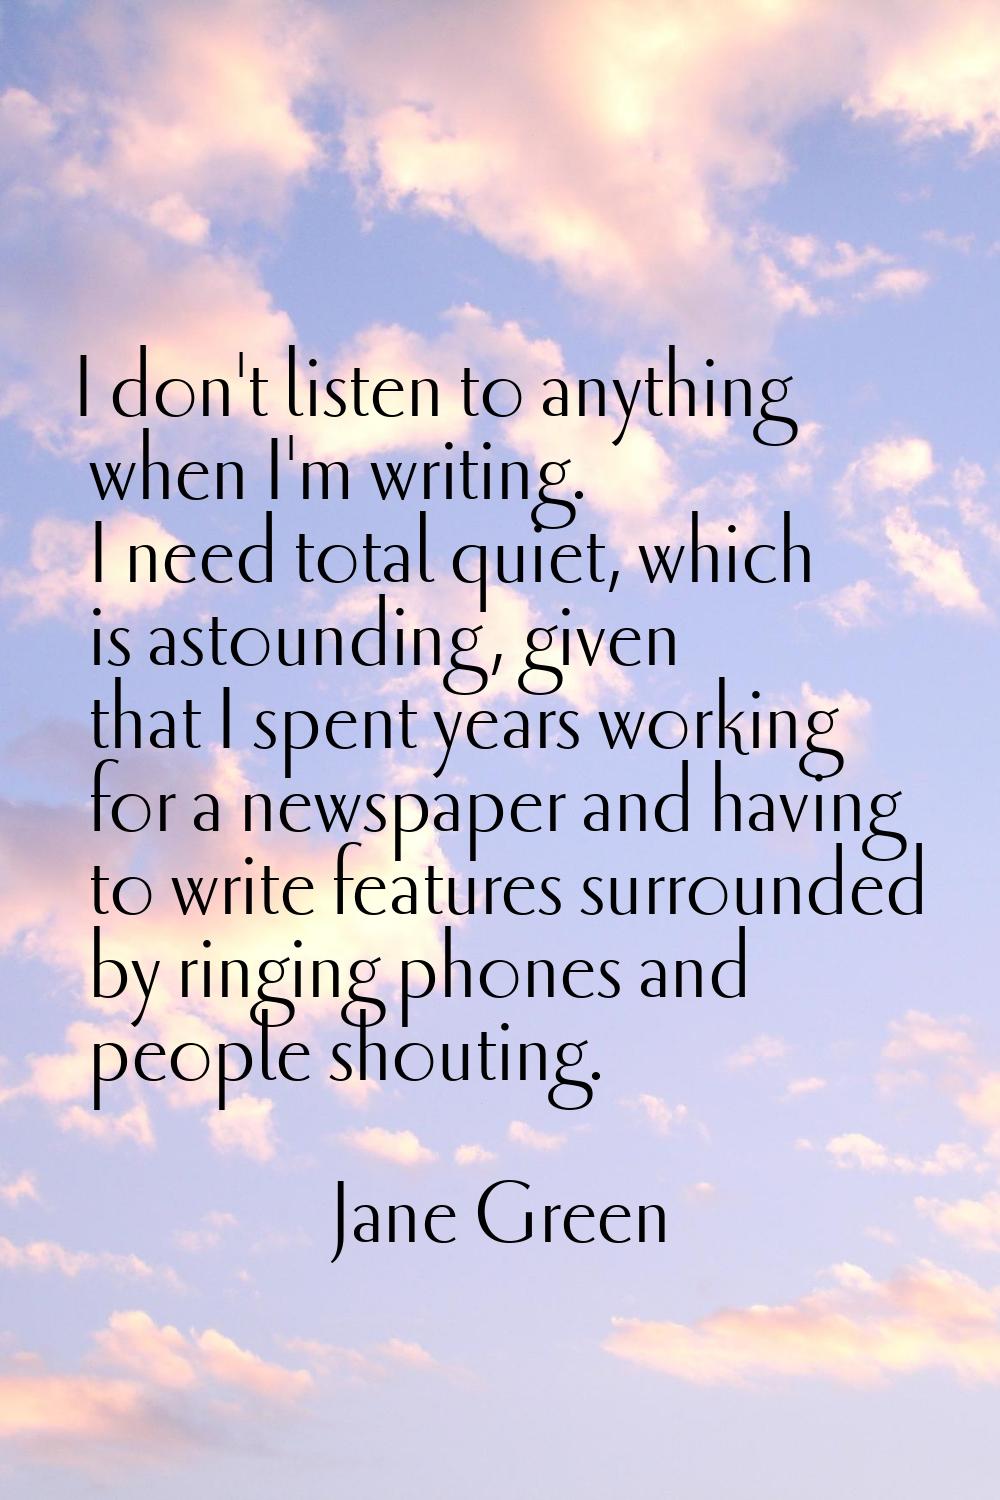 I don't listen to anything when I'm writing. I need total quiet, which is astounding, given that I 